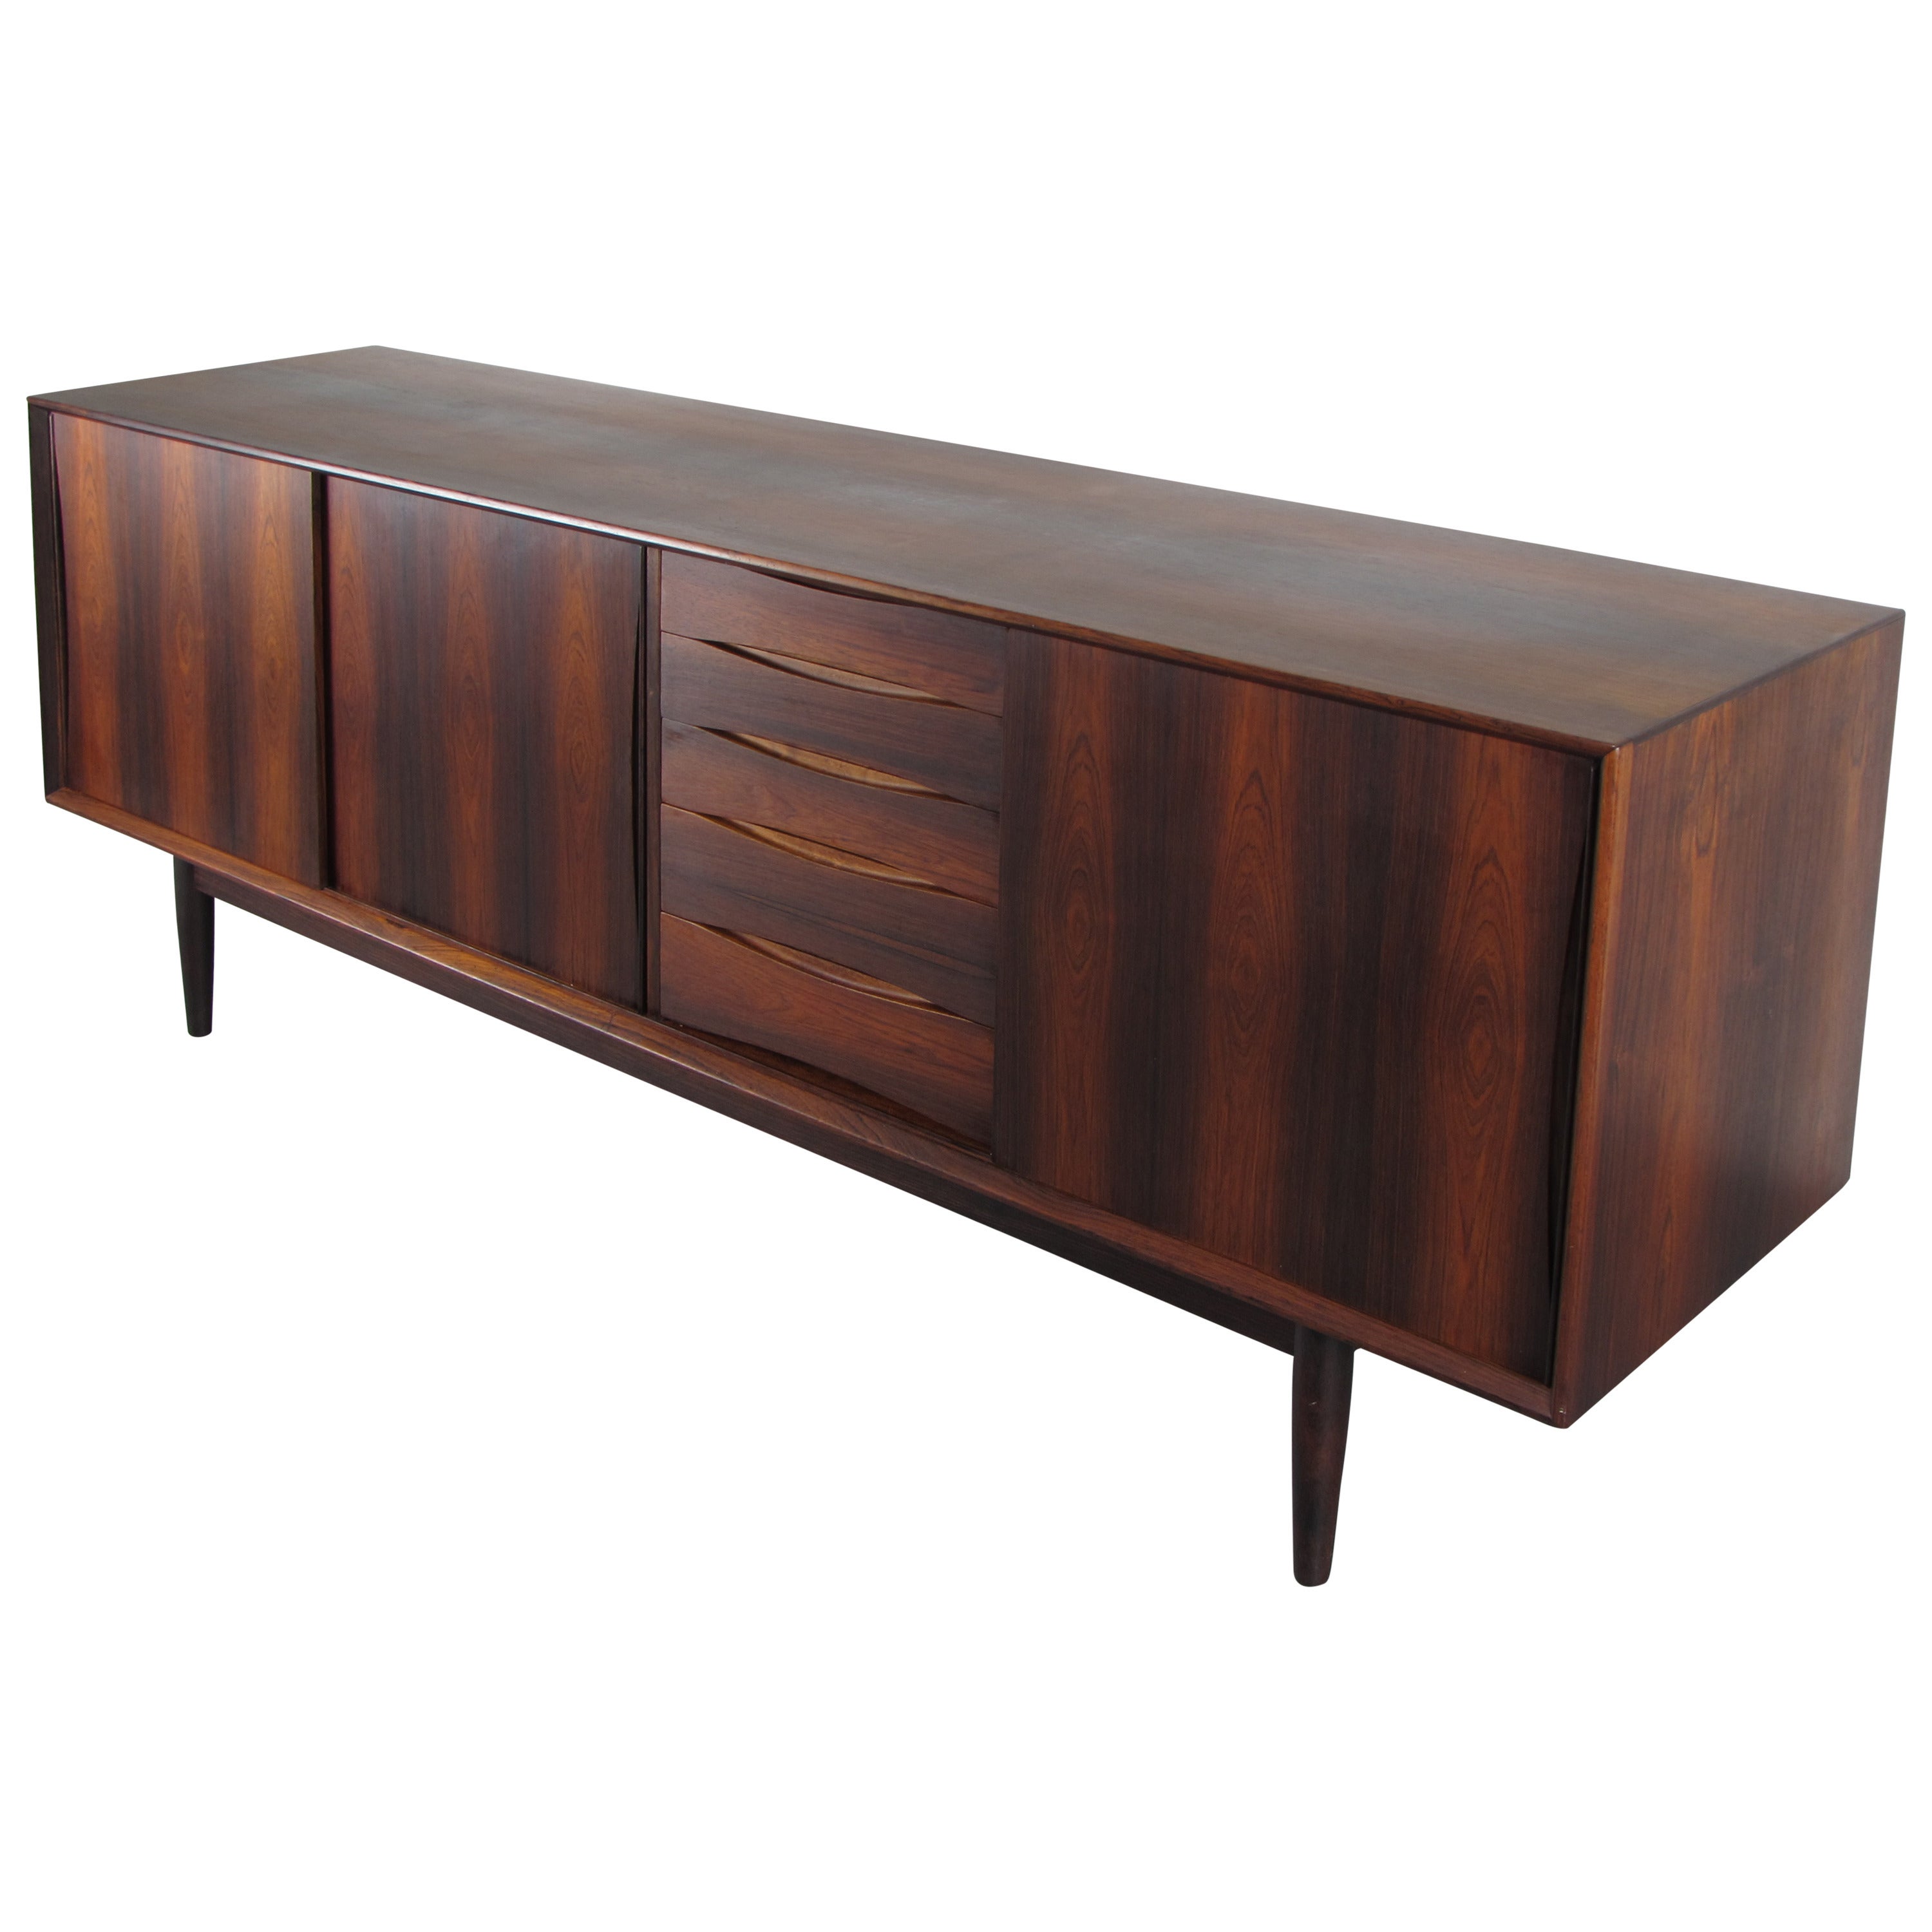 Exceptional Danish Modern Bookmatched Rosewood Buffet with Sliding Doors, 1960s